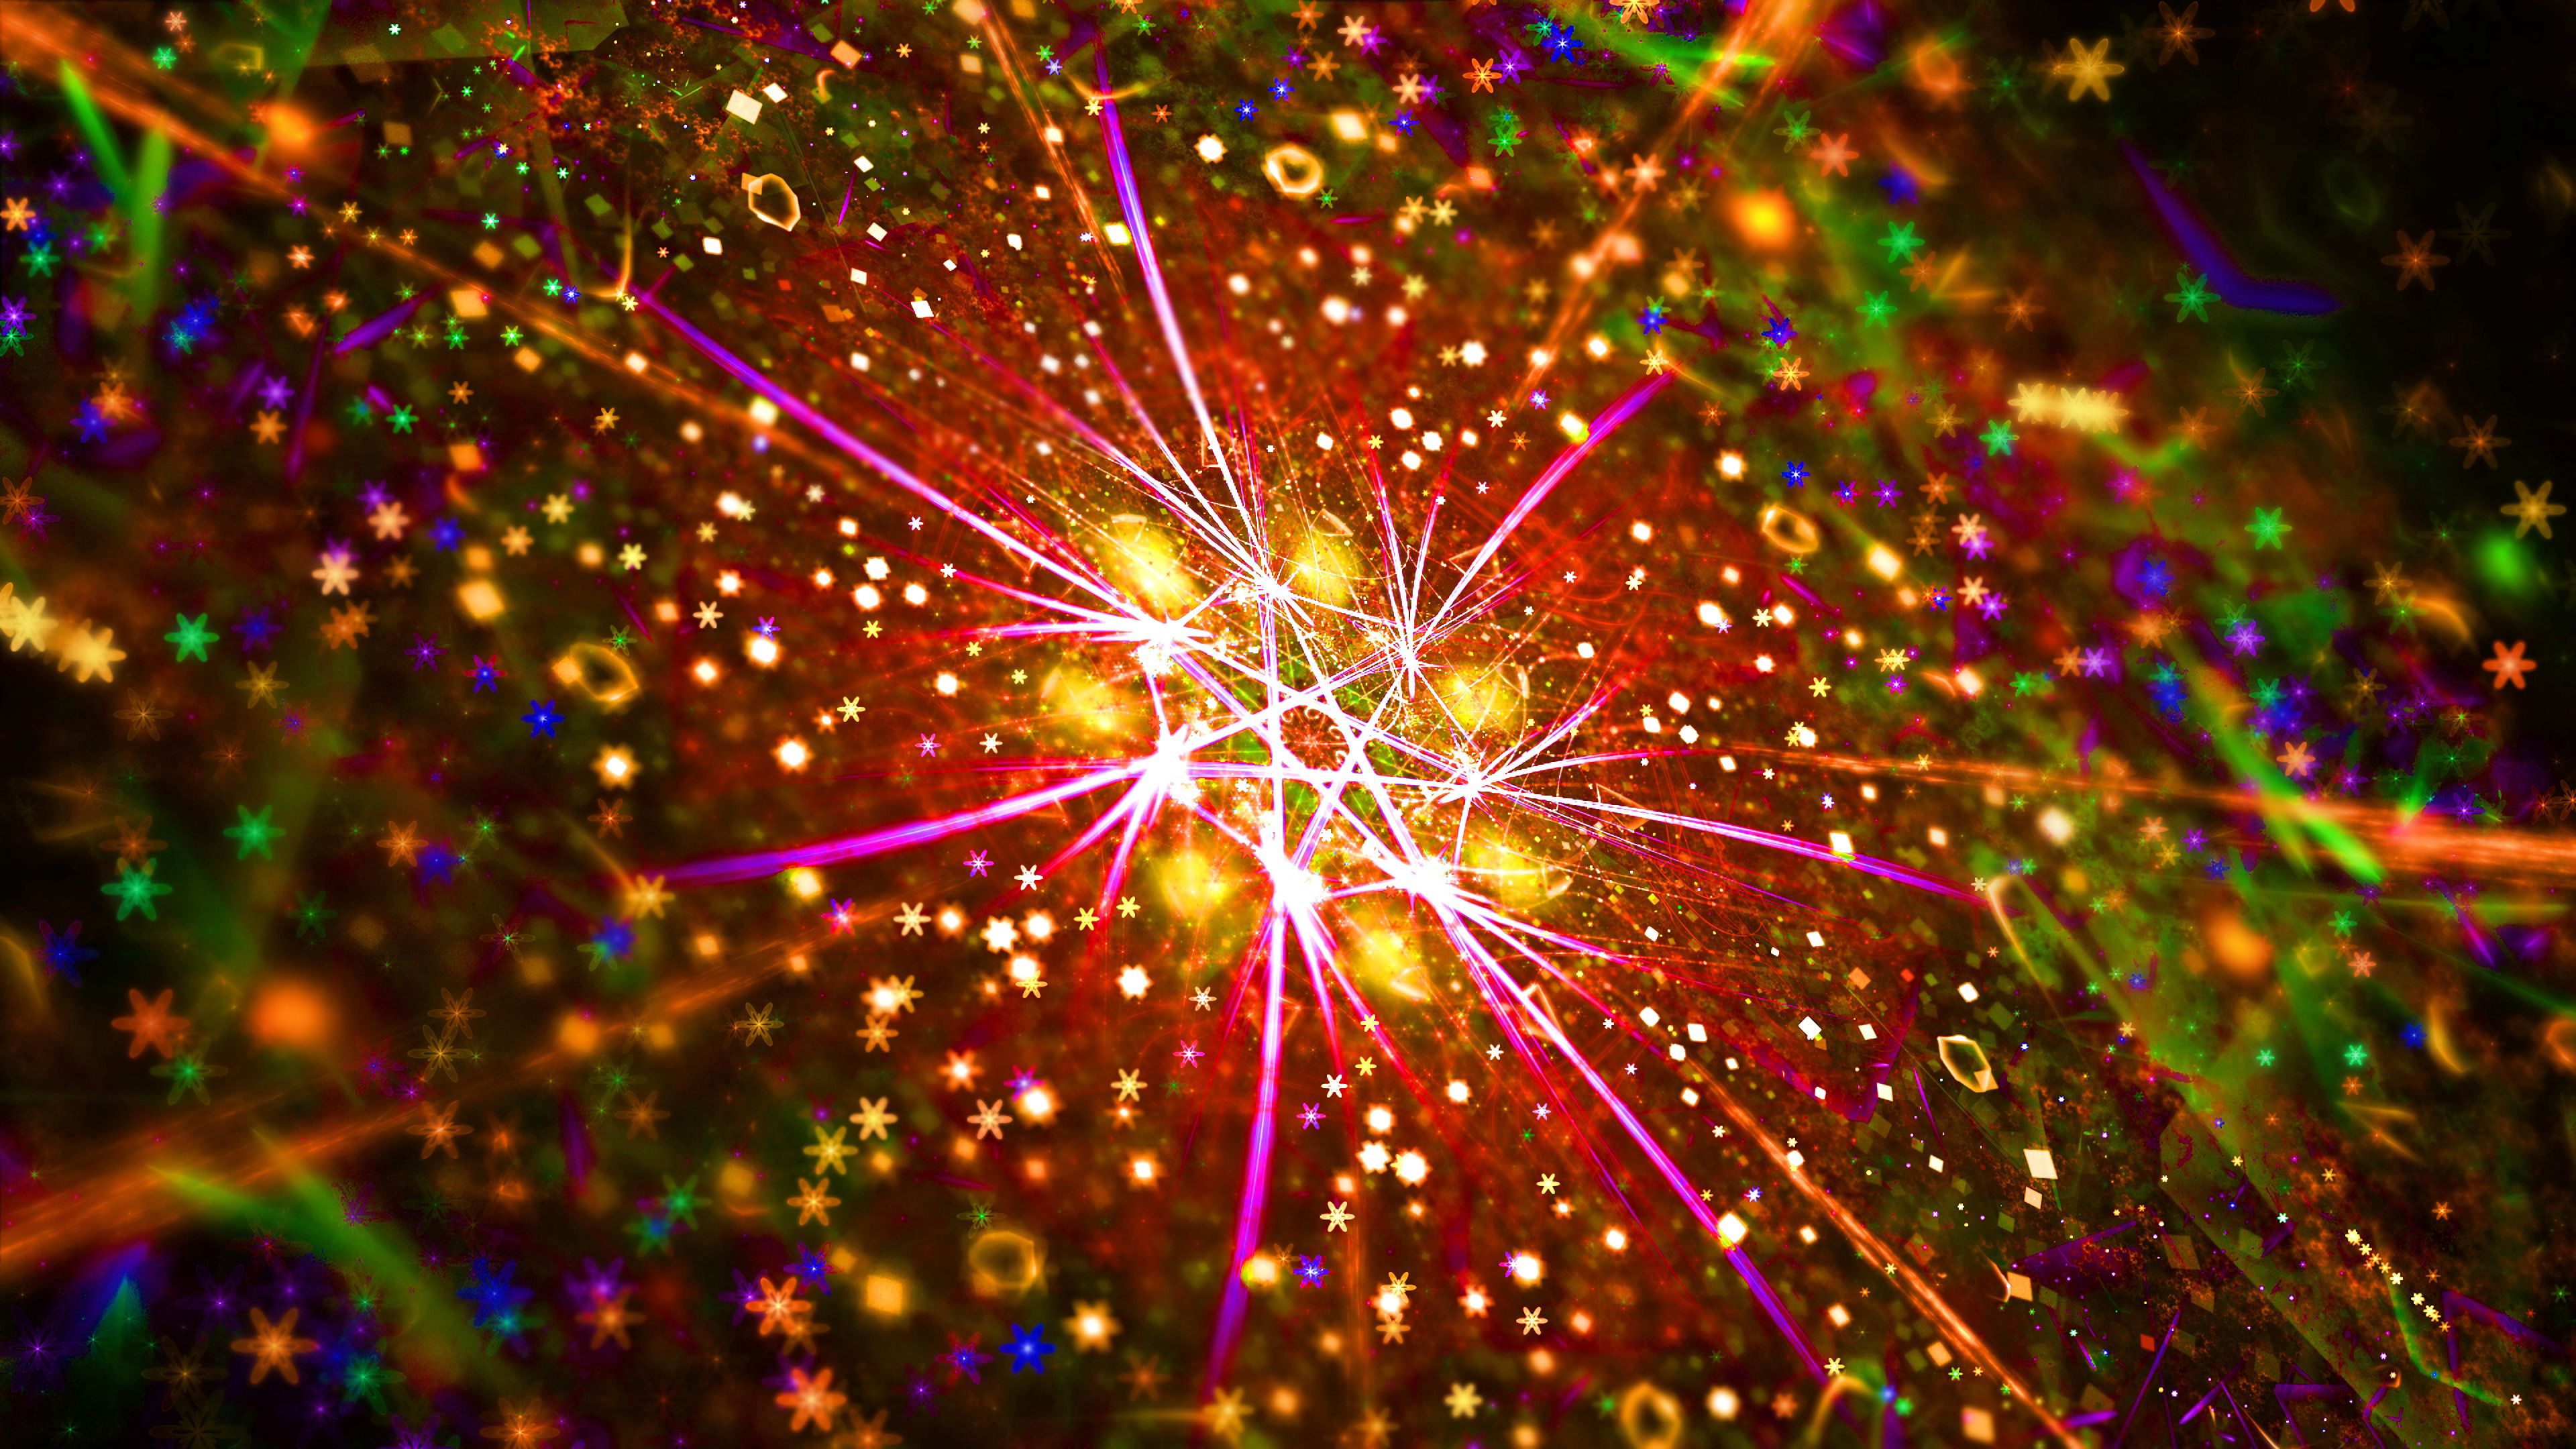 multicolored, abstract, glow, fractal collection of HD images